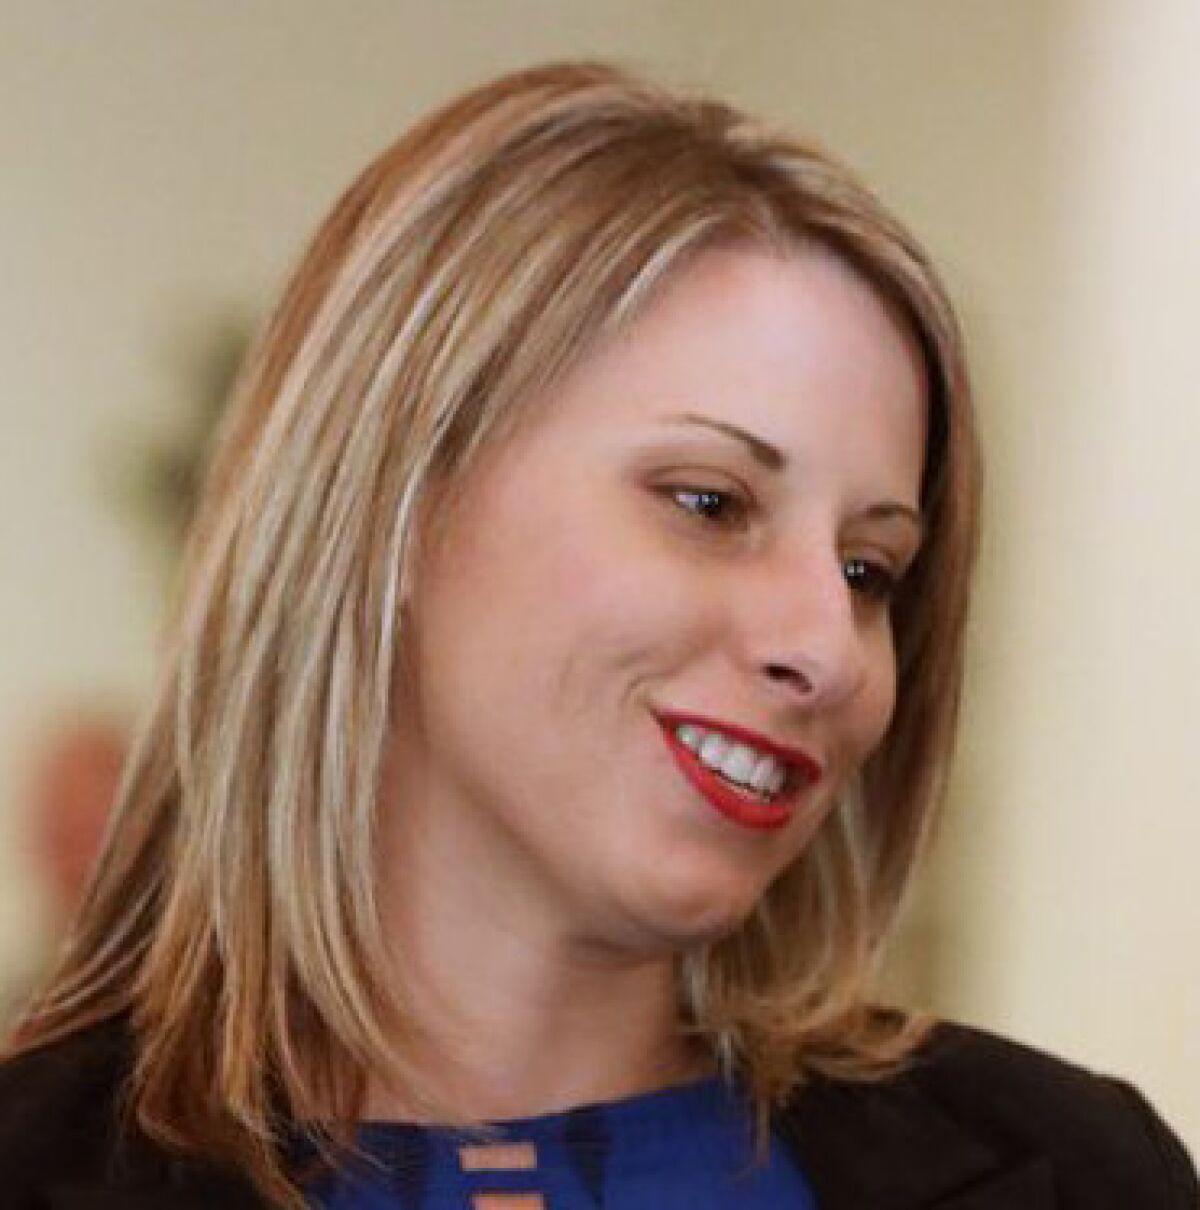 Katie Hill has been granted a restraining order against her ex-husband, Kenneth Heslep.